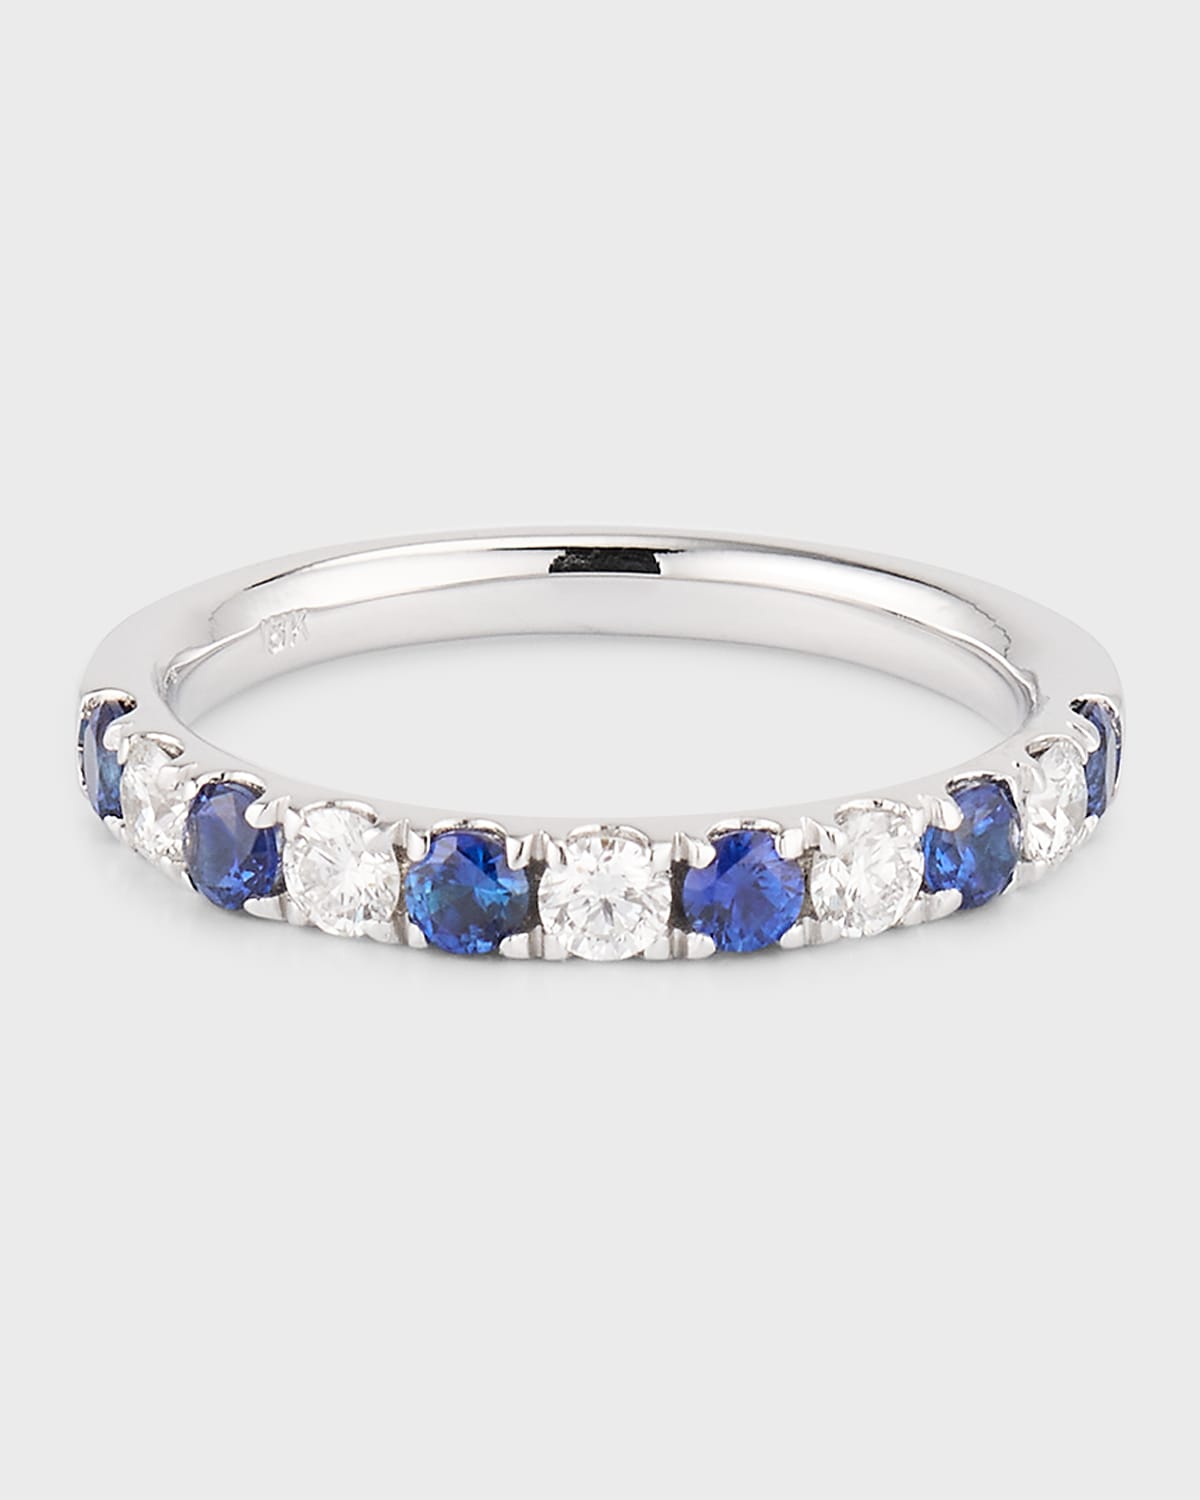 18K White Gold Ring with 2.5mm Alternating Blue Sapphires and Diamonds, Size 6